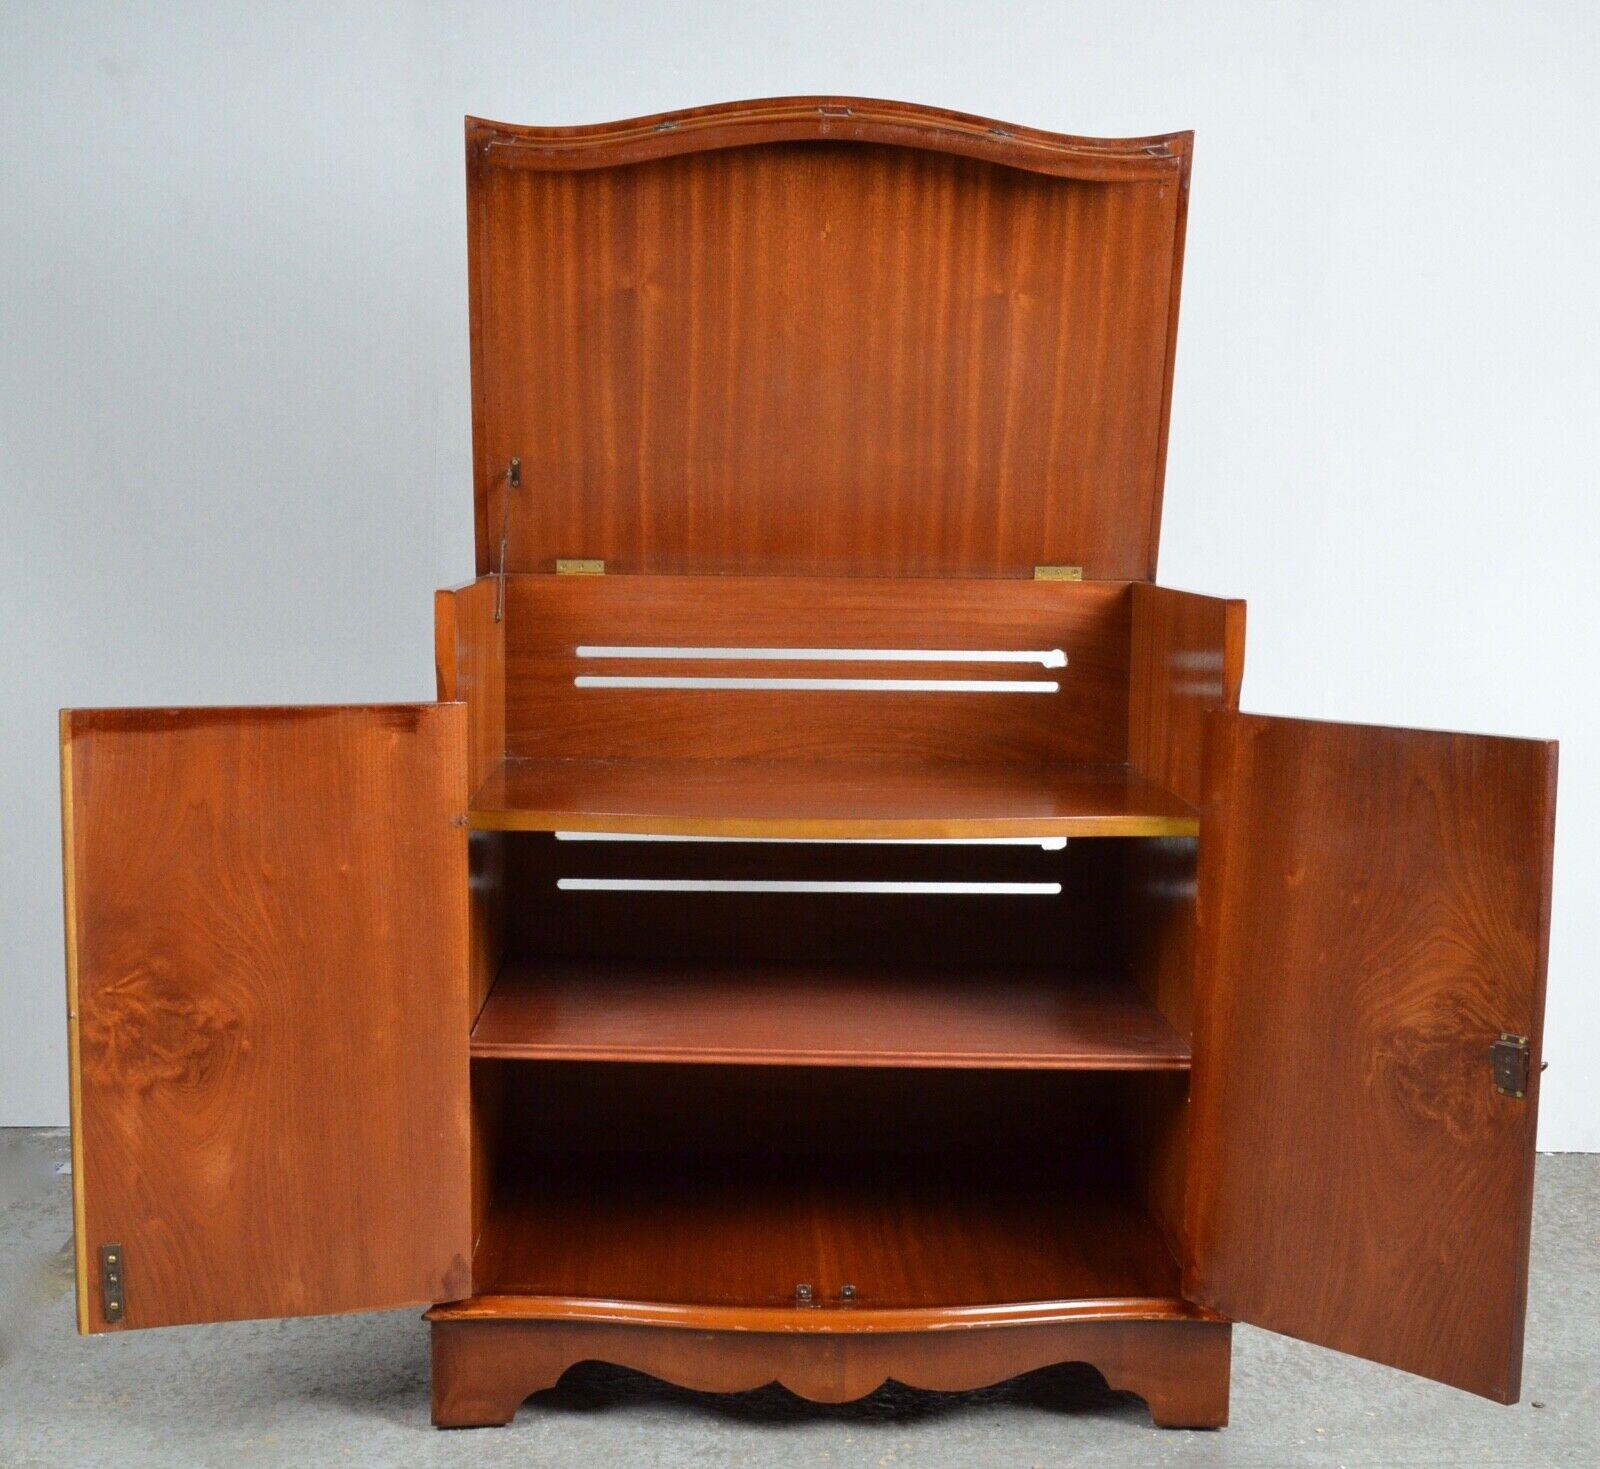 Hand-Crafted Vintage Television Media Cabinet Cupboard in Walnut For Sale